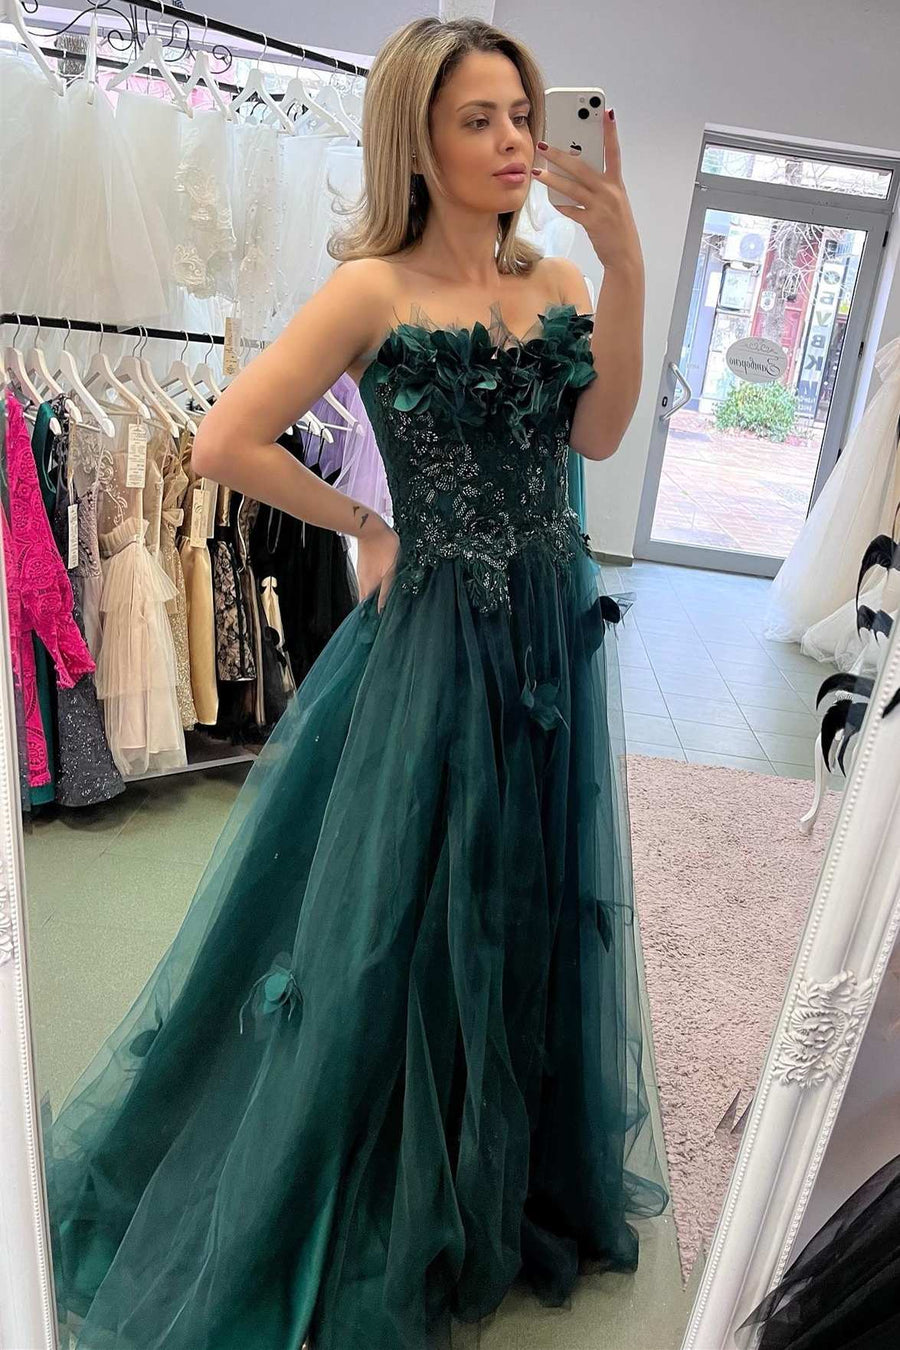 Strapless Hunter Green 3D Floral Lace A-Line Prom Dress with Slit